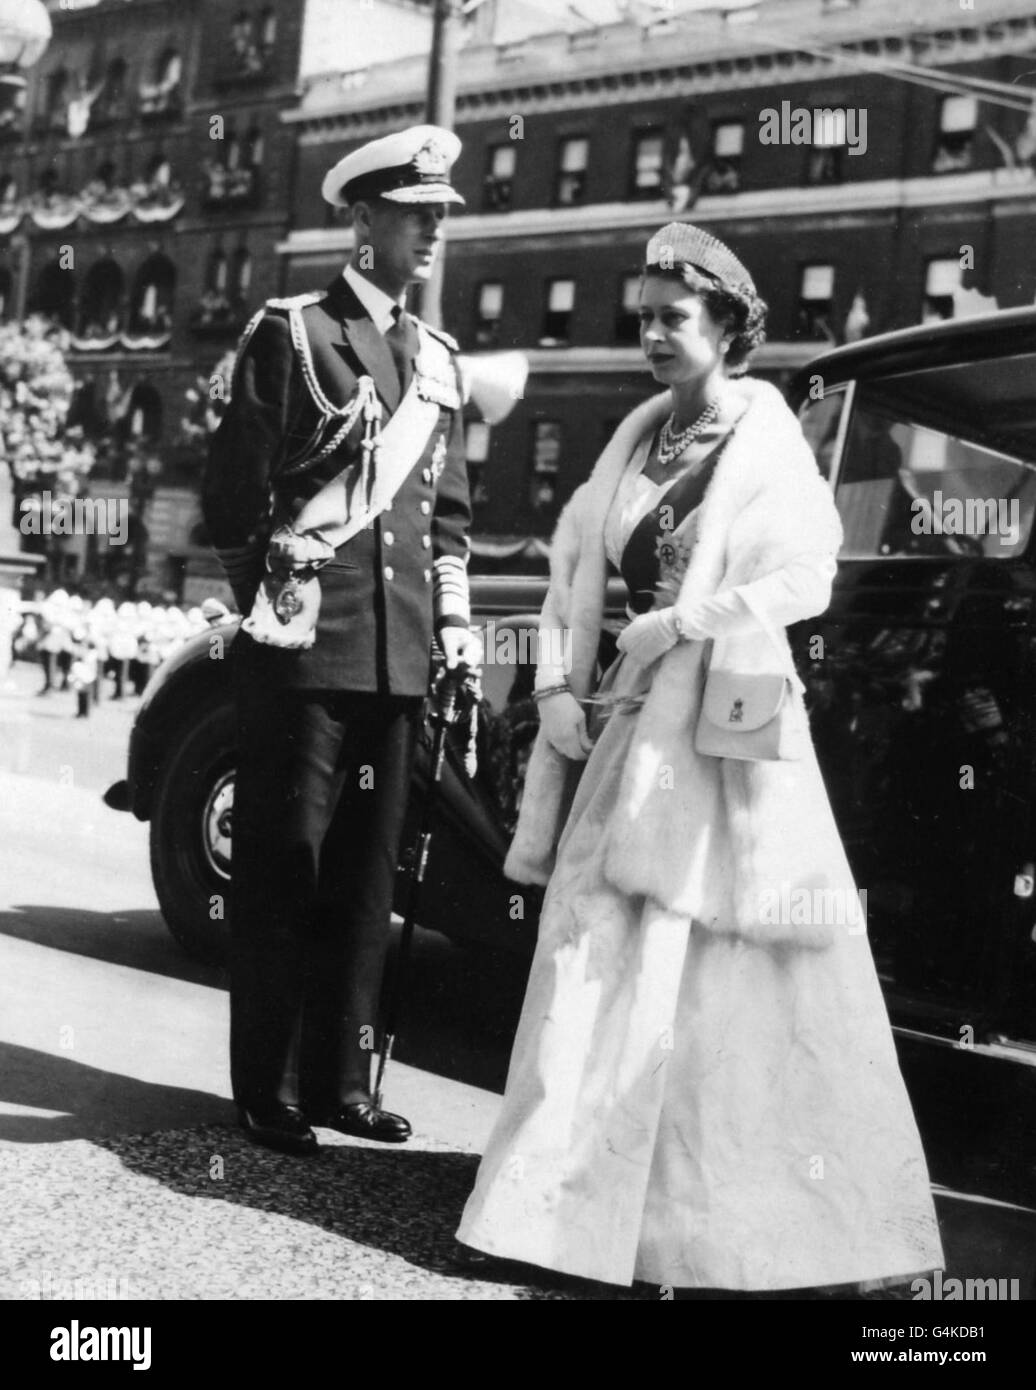 The Queen arriving to open the Parliament of Victoria in Melbourne, during her royal tour of Australia. With the Queen is the Duke of Edinburgh, in uniform as Admiral of the Fleet. Stock Photo